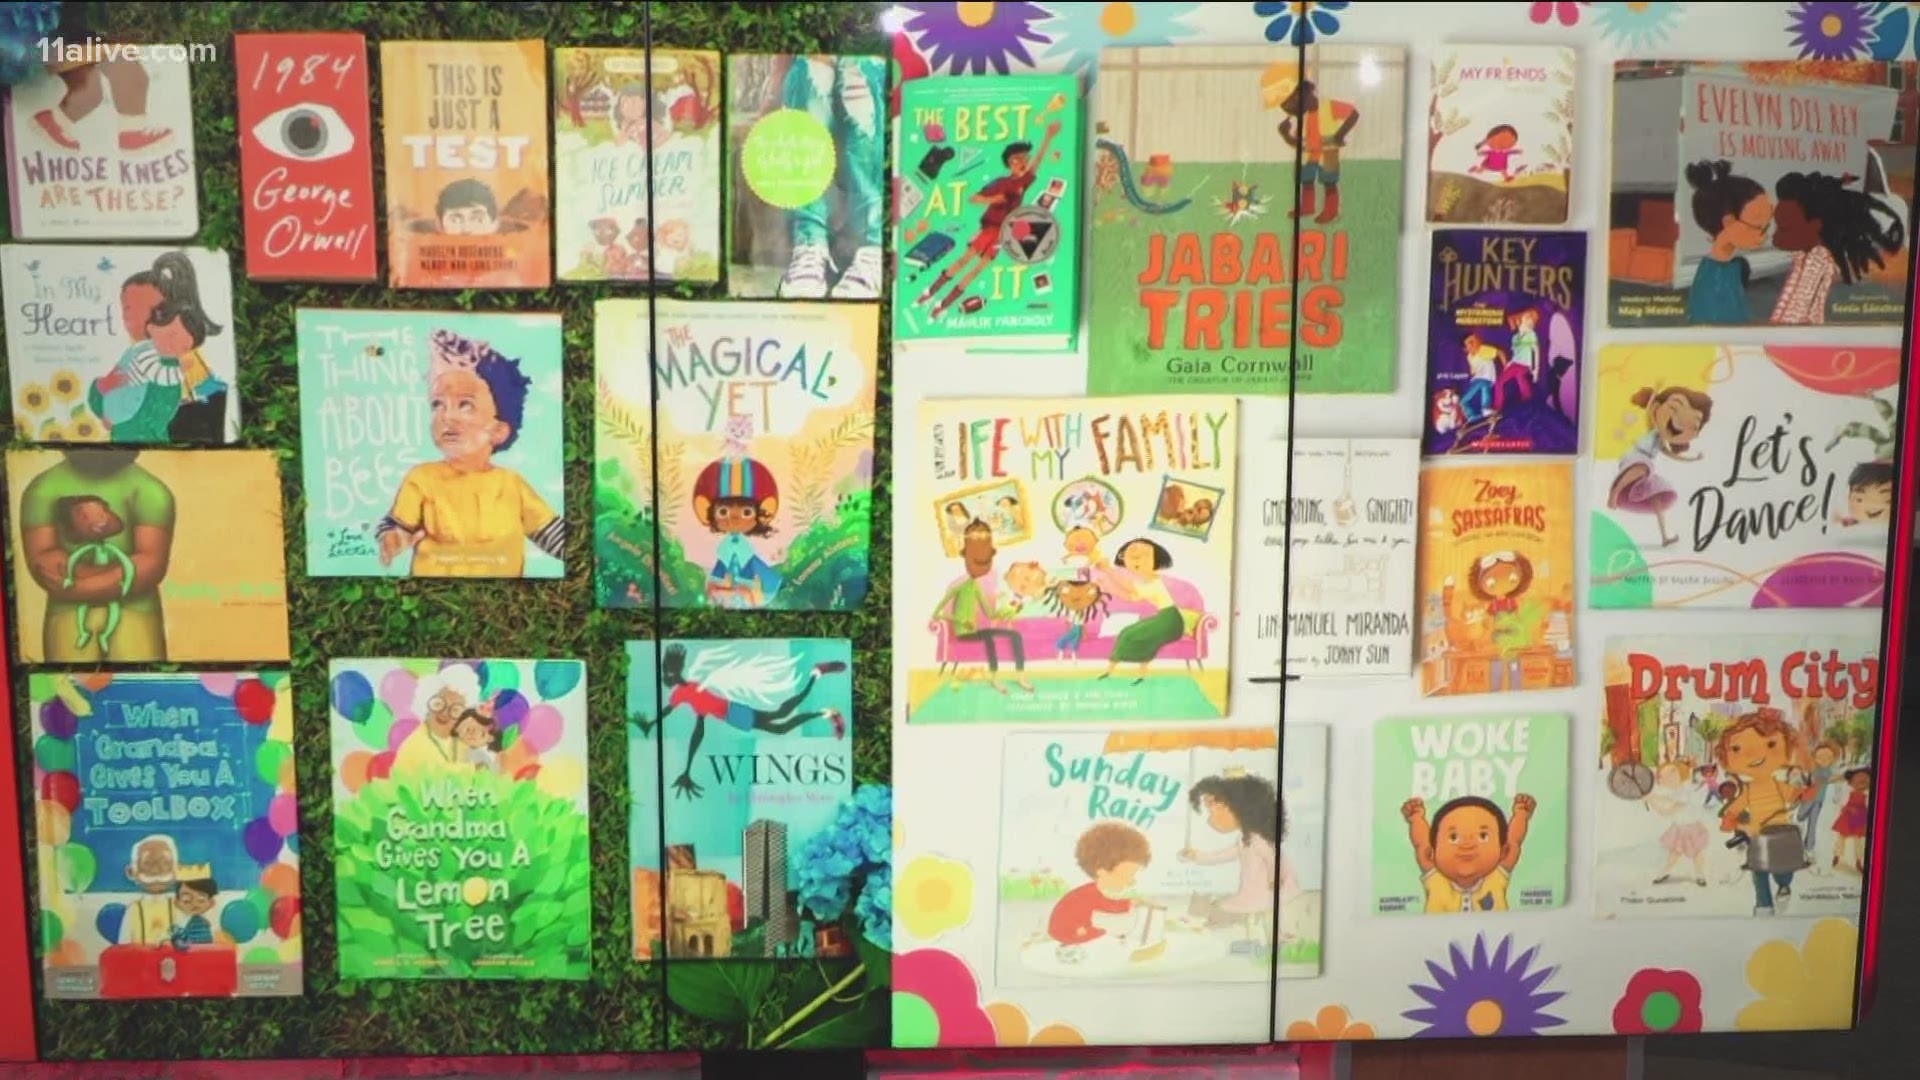 She curates more than 350 children's books all featuring kids of color.